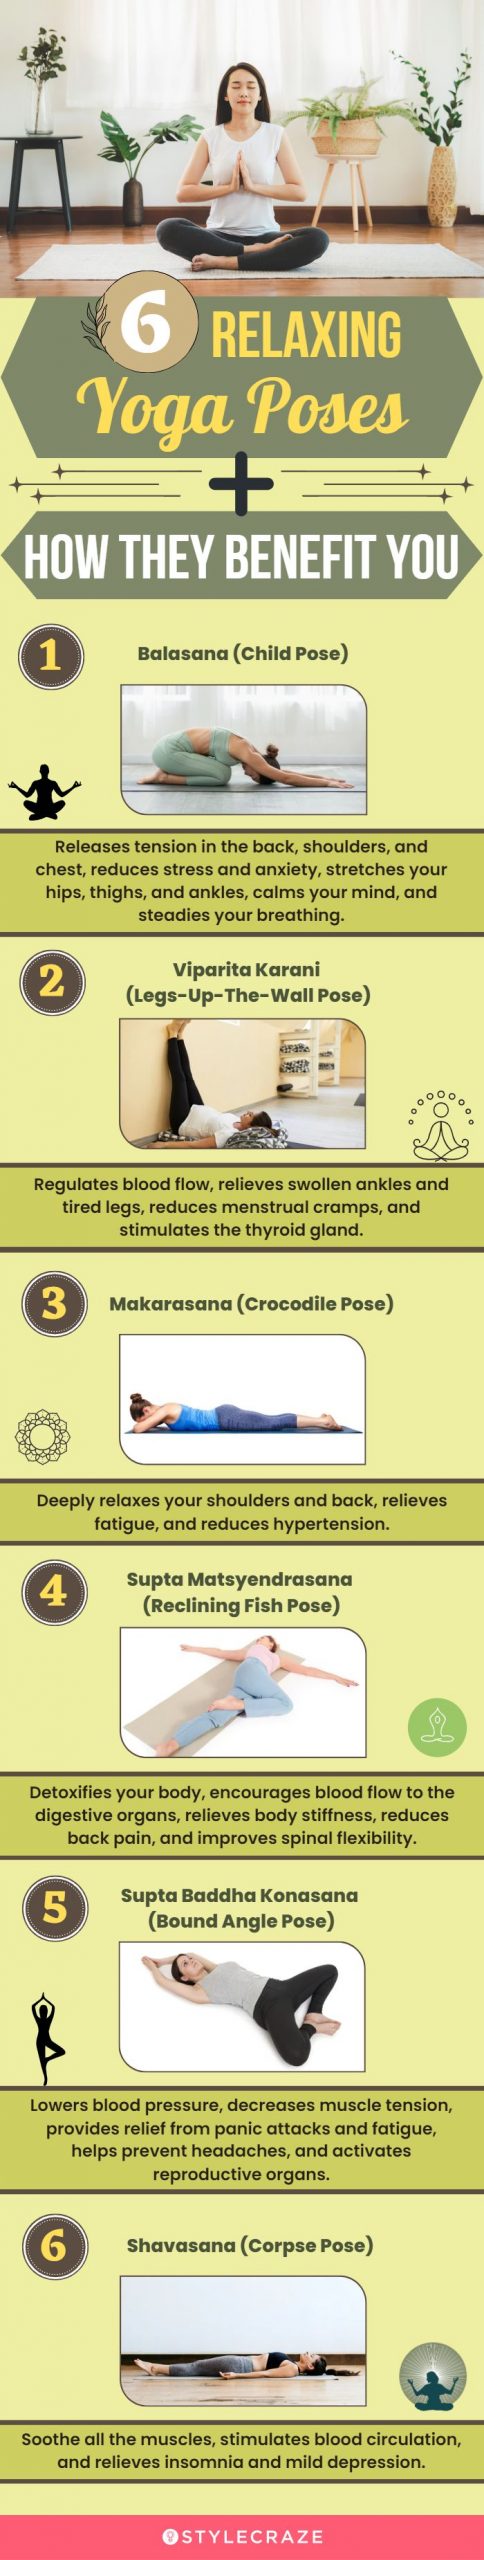 6 relaxing yoga poses + how they benefit you (infographic)